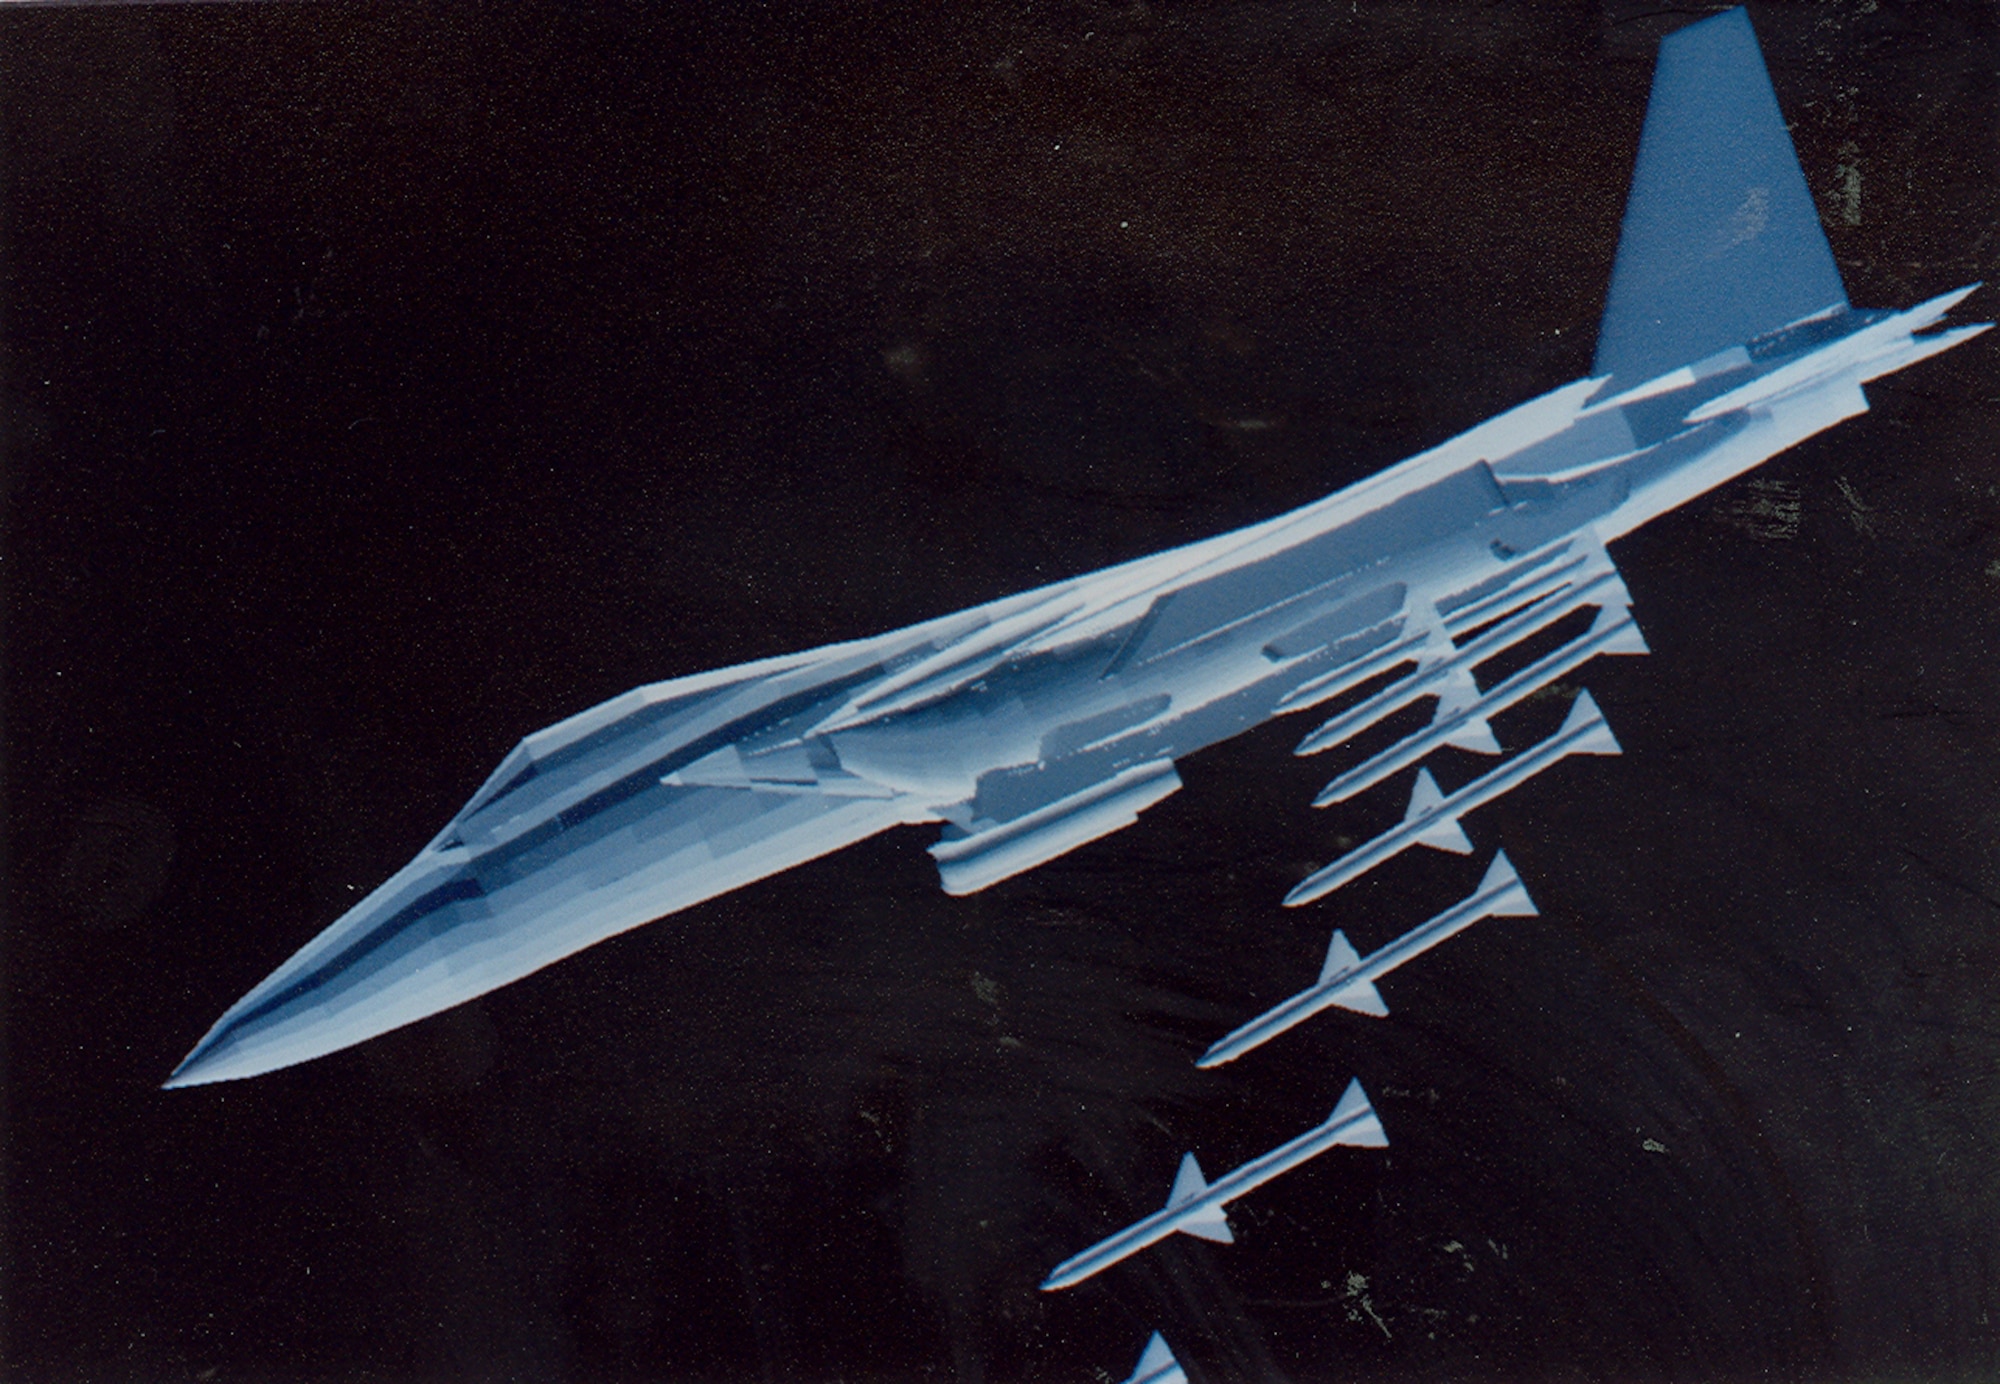 A computer-drawn mathematical model shows a Sparrow Air Intercept Missile launch from an F-15E Strike Eagle aircraft. Identical videotape footage of the launch was shot during actual flight testing. This computer simulation was based on numerical data taken during wind tunnel testing by Arnold Engineering Development Complex, headquartered at Arnold Air Force Base, Tennessee. The Air Force recently celebrated the 50th anniversary of the F-15’s deployment. Models of the aircraft, engines and other F-15 components, including those of the F-15E, have frequently been tested in AEDC facilities over the past 50 years. (U.S. Air Force photo)